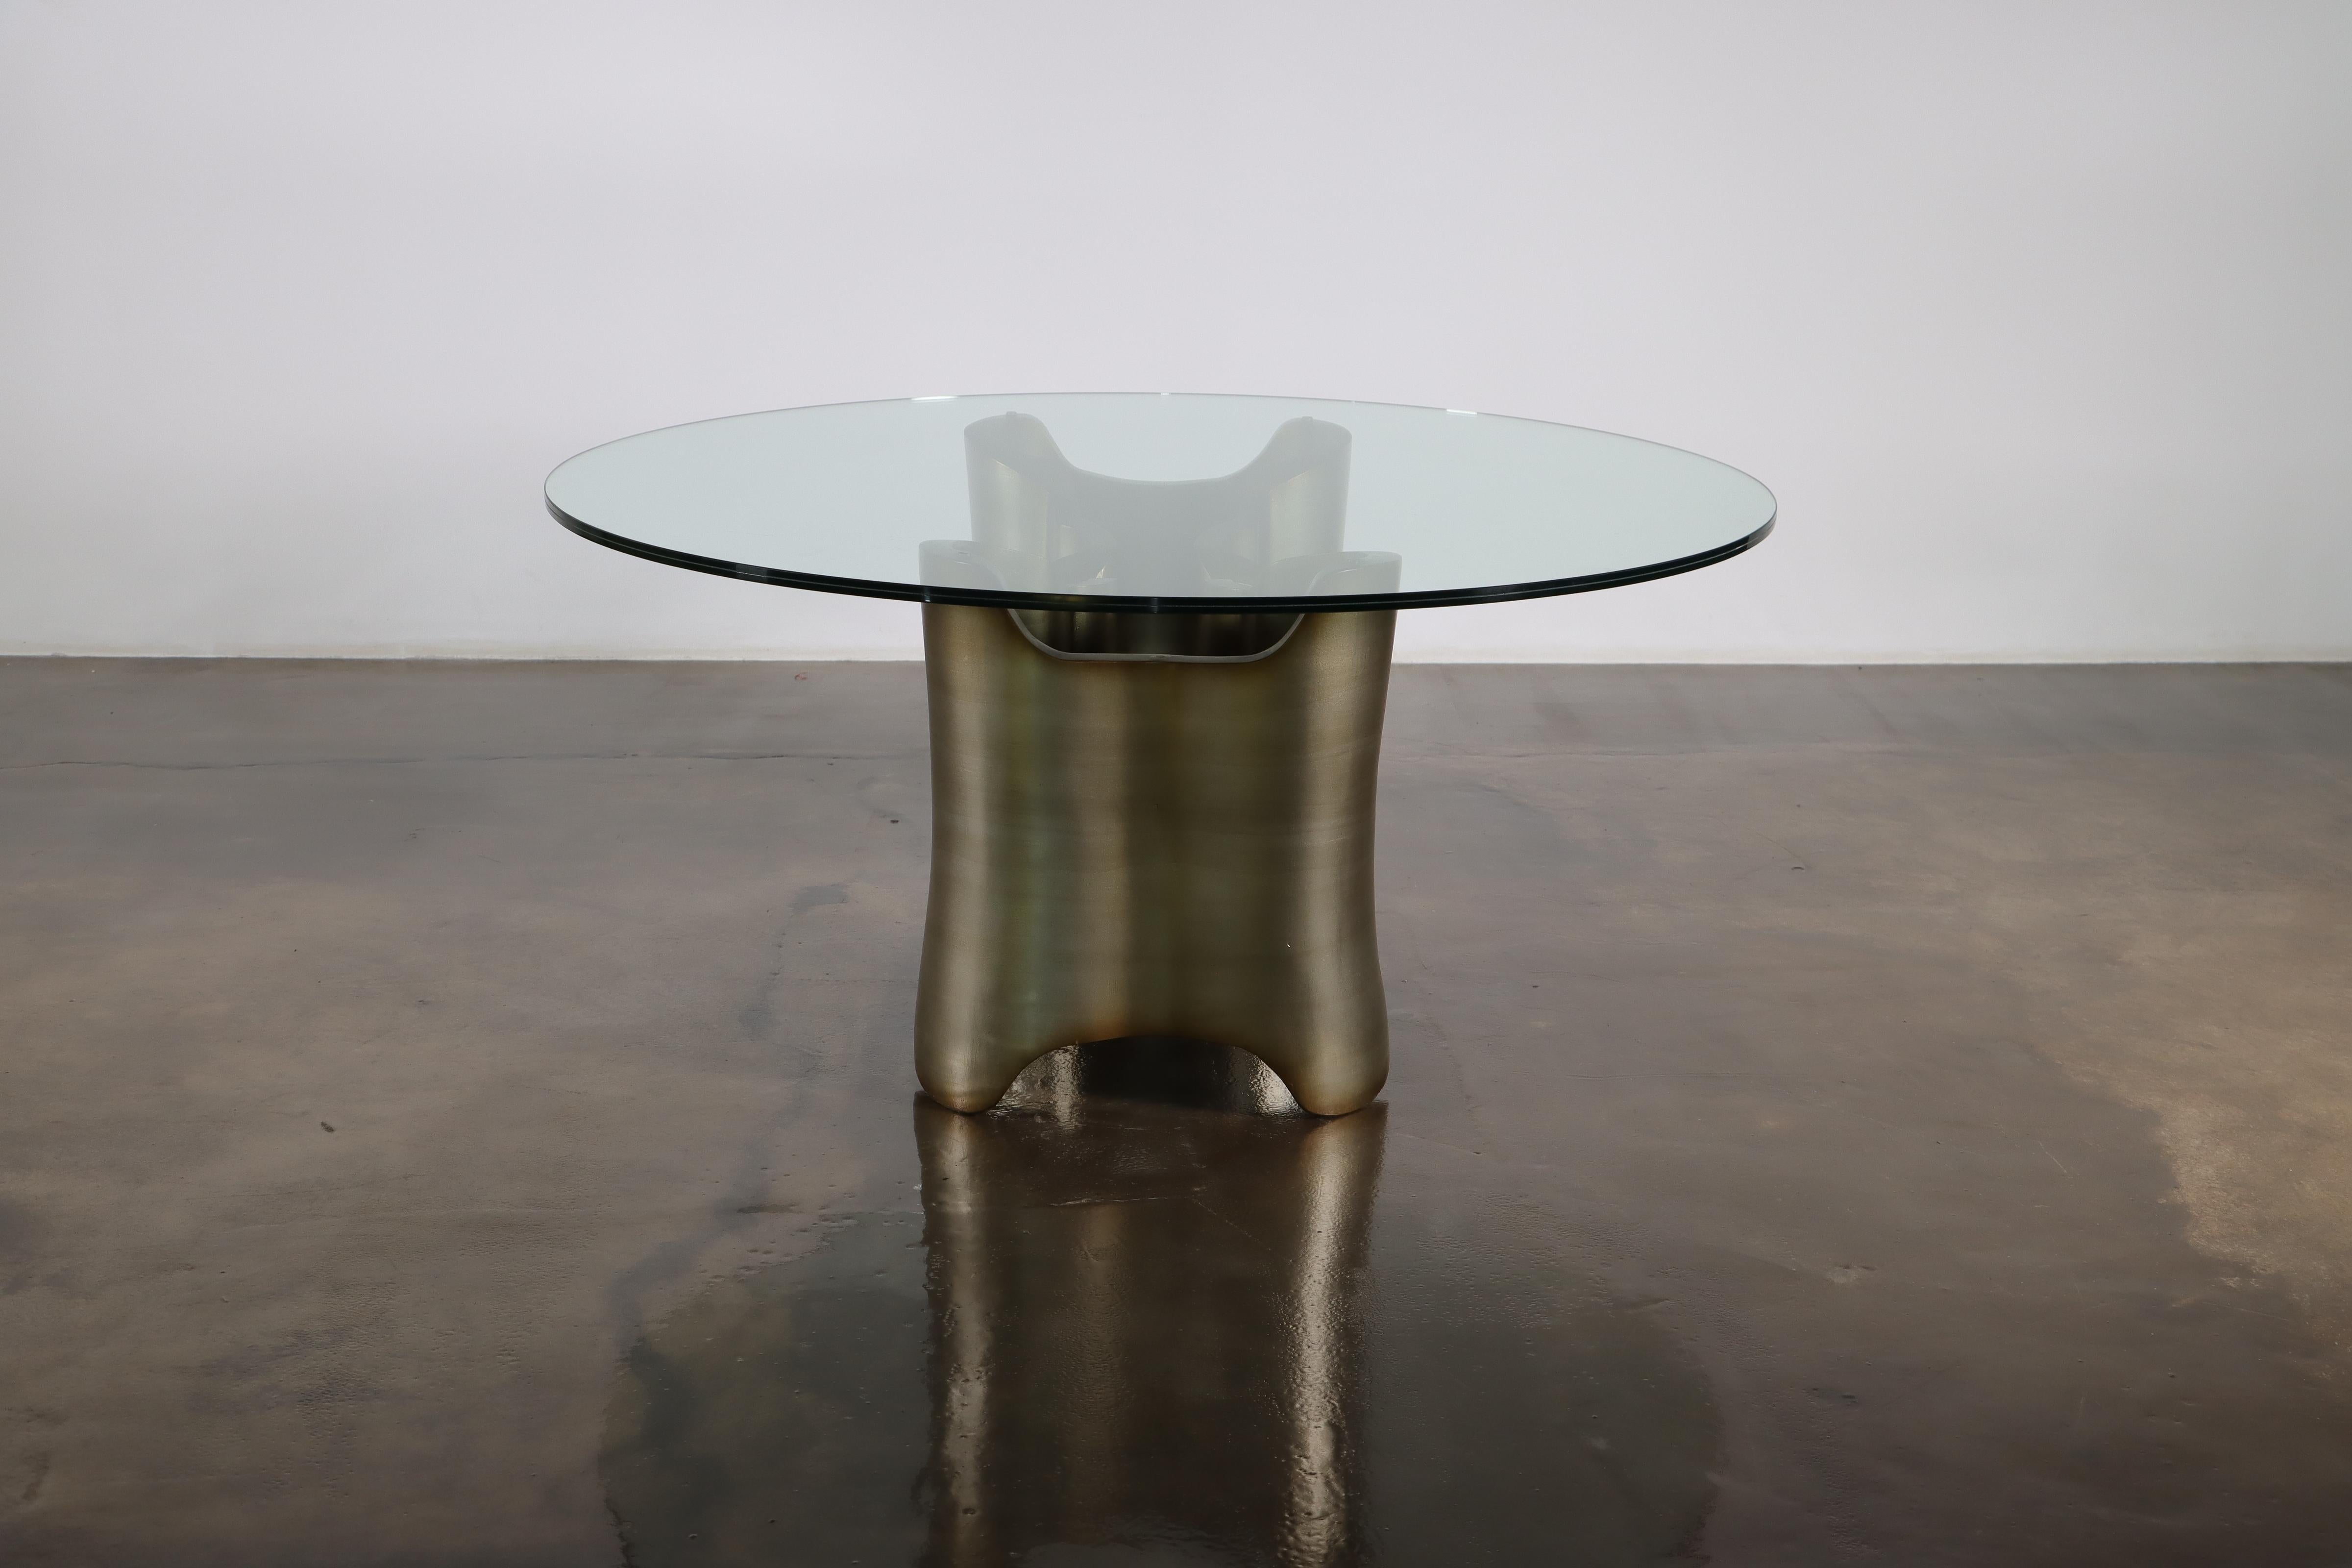 Argentine Sculptural Lacquered Wood & Glass Coffee Table by Costantini, Mariposa -in Stock For Sale